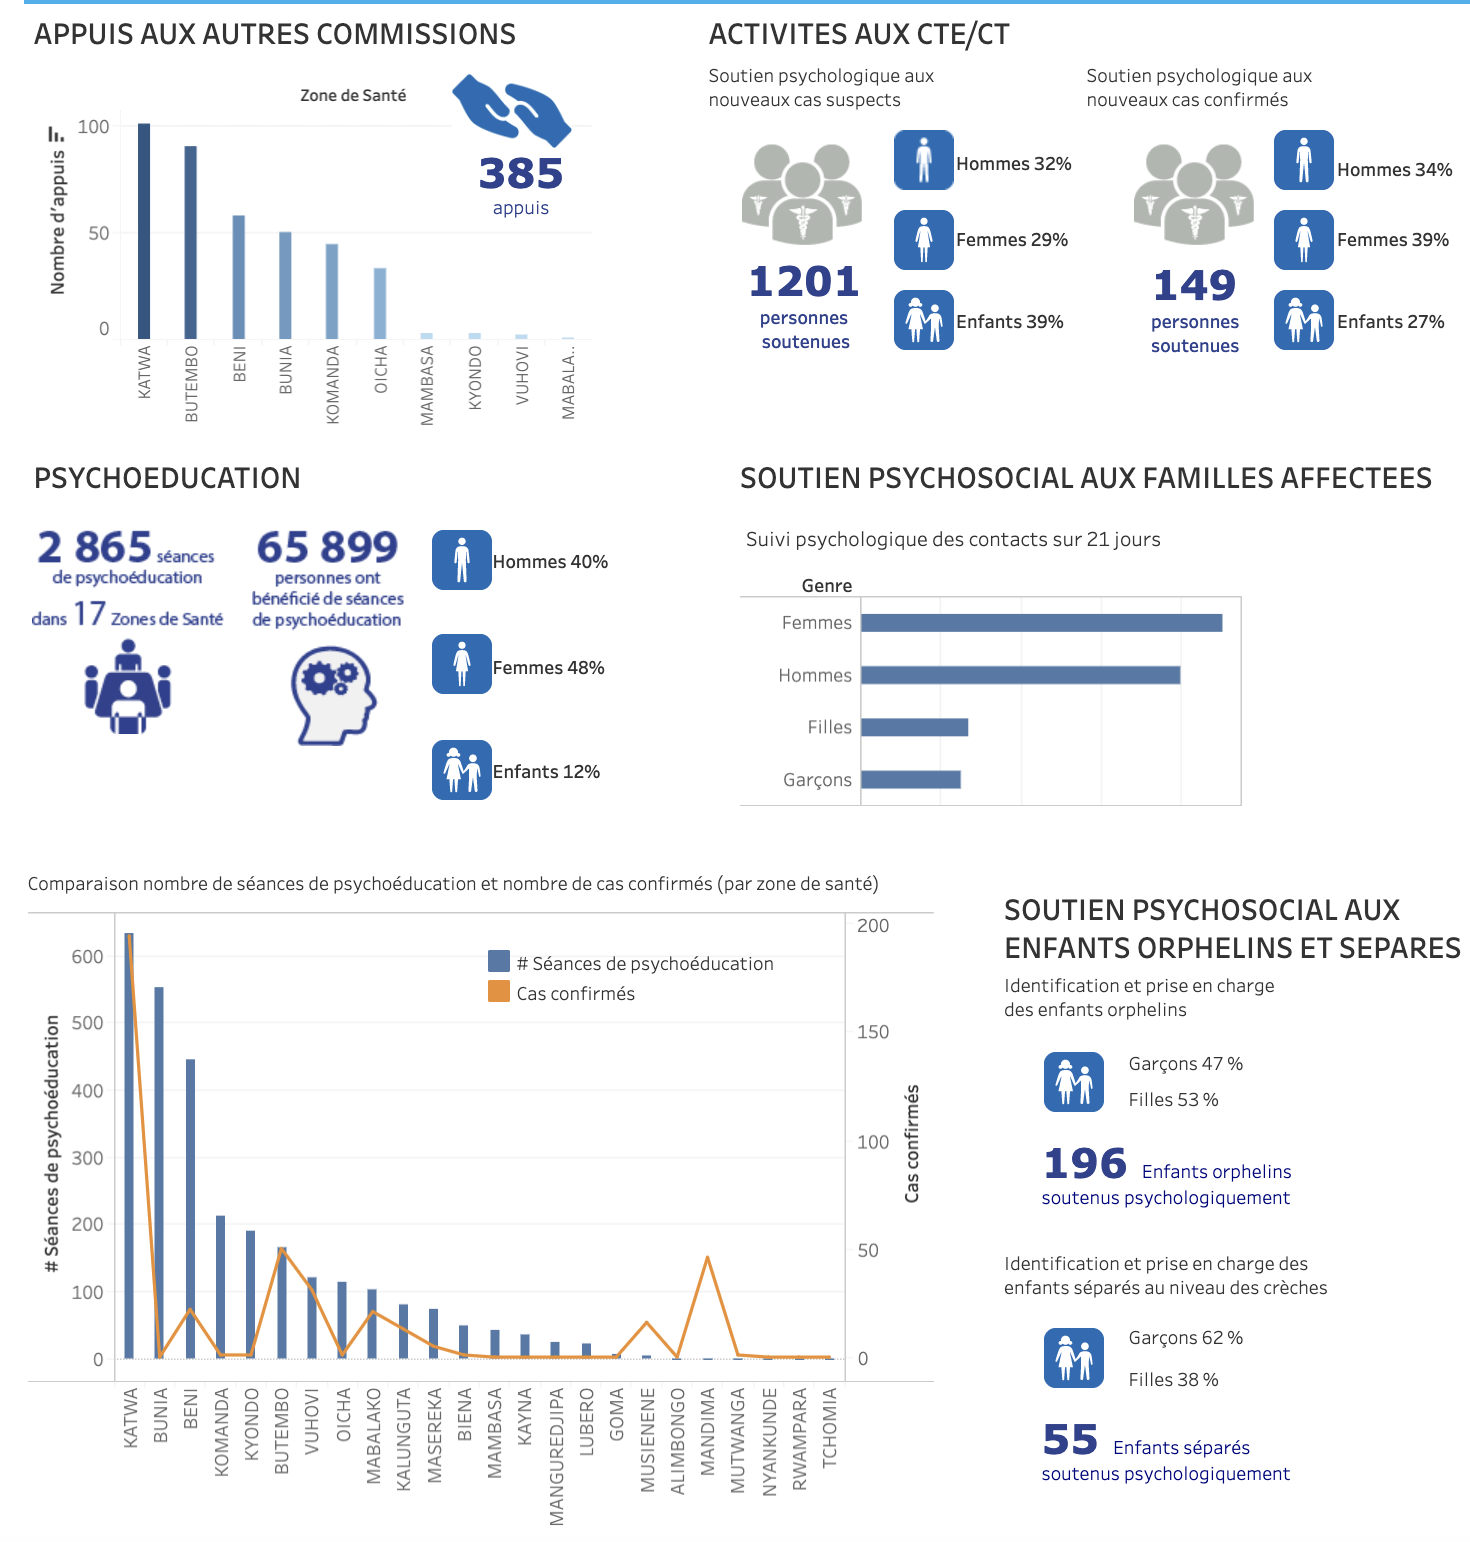 Monitoring the Ebola Response in the DRC - Psychosocial Dashboard